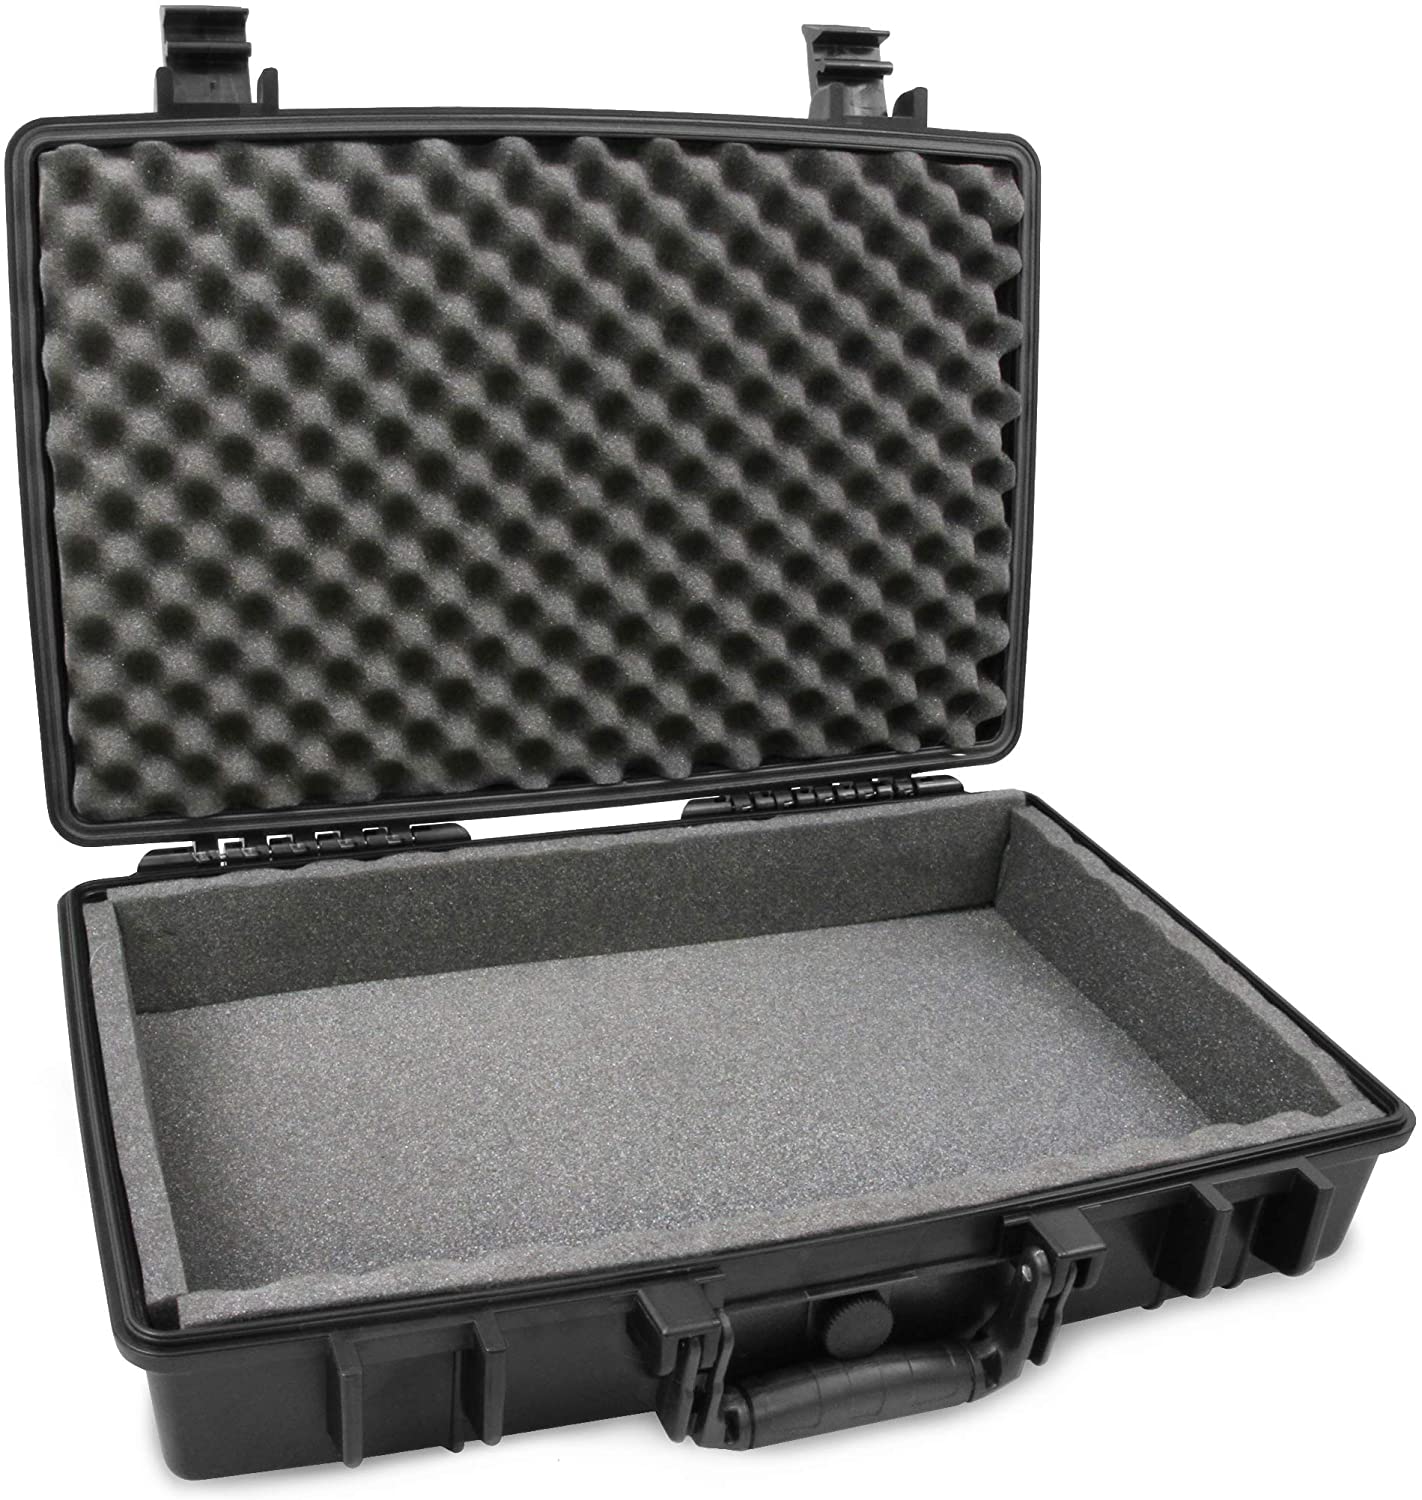 CASEMATIX Waterproof 15.6 inch Laptop Hard - Crushproof Laptop Case Compatible with HP Pavillion 360, Envy x360, Stream 14, Chromebook 14 & More | Lightweight & Affordable Hard Cases For Microphones, Guns, PS5s & More